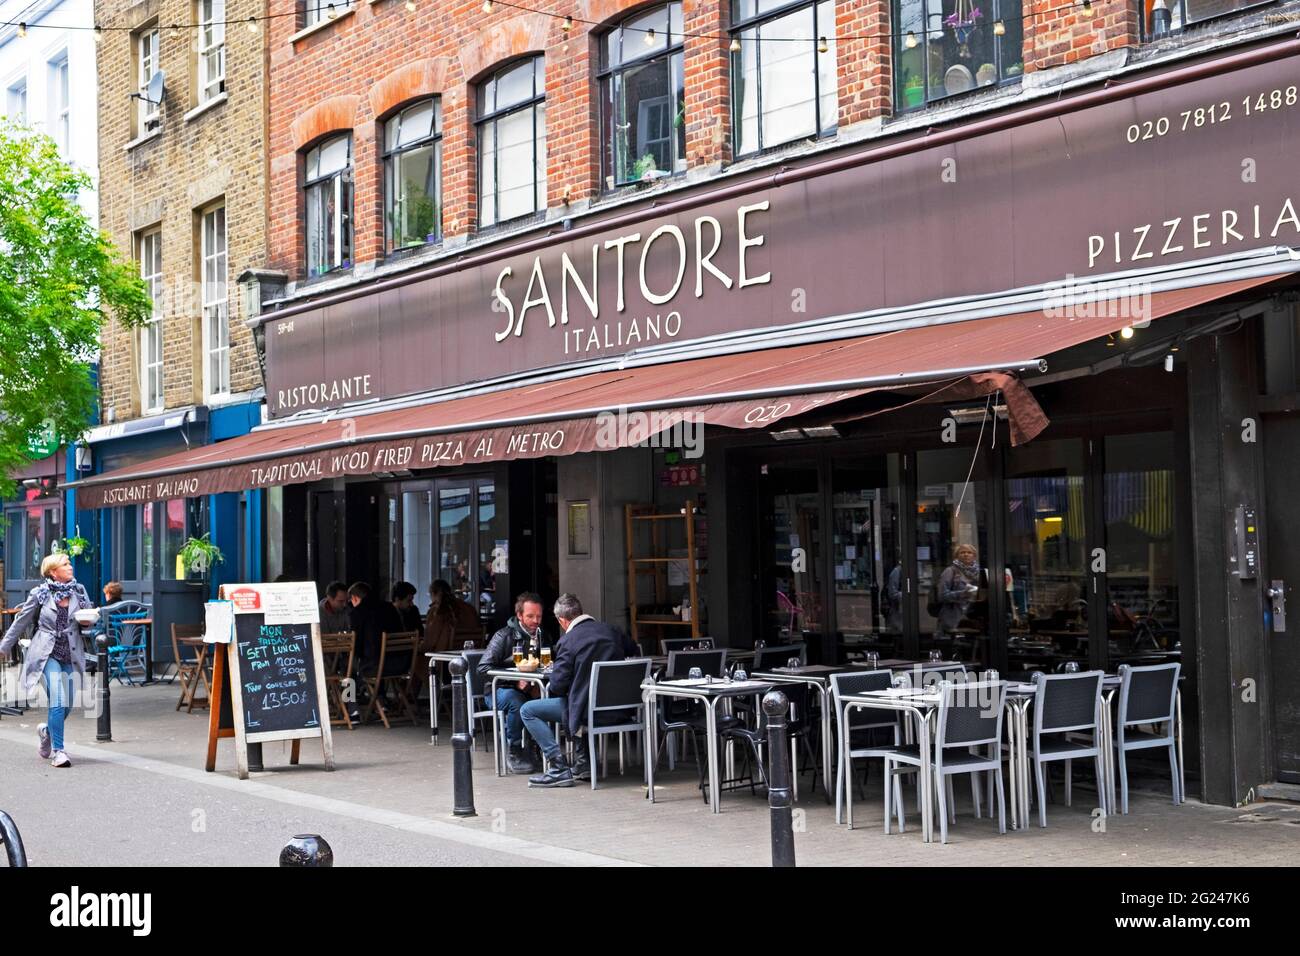 Santore Italian restaurant and pizzeria exterior people sitting at tables outside in Exmouth Market street Clerkenwell London England UK  KATHY DEWITT Stock Photo